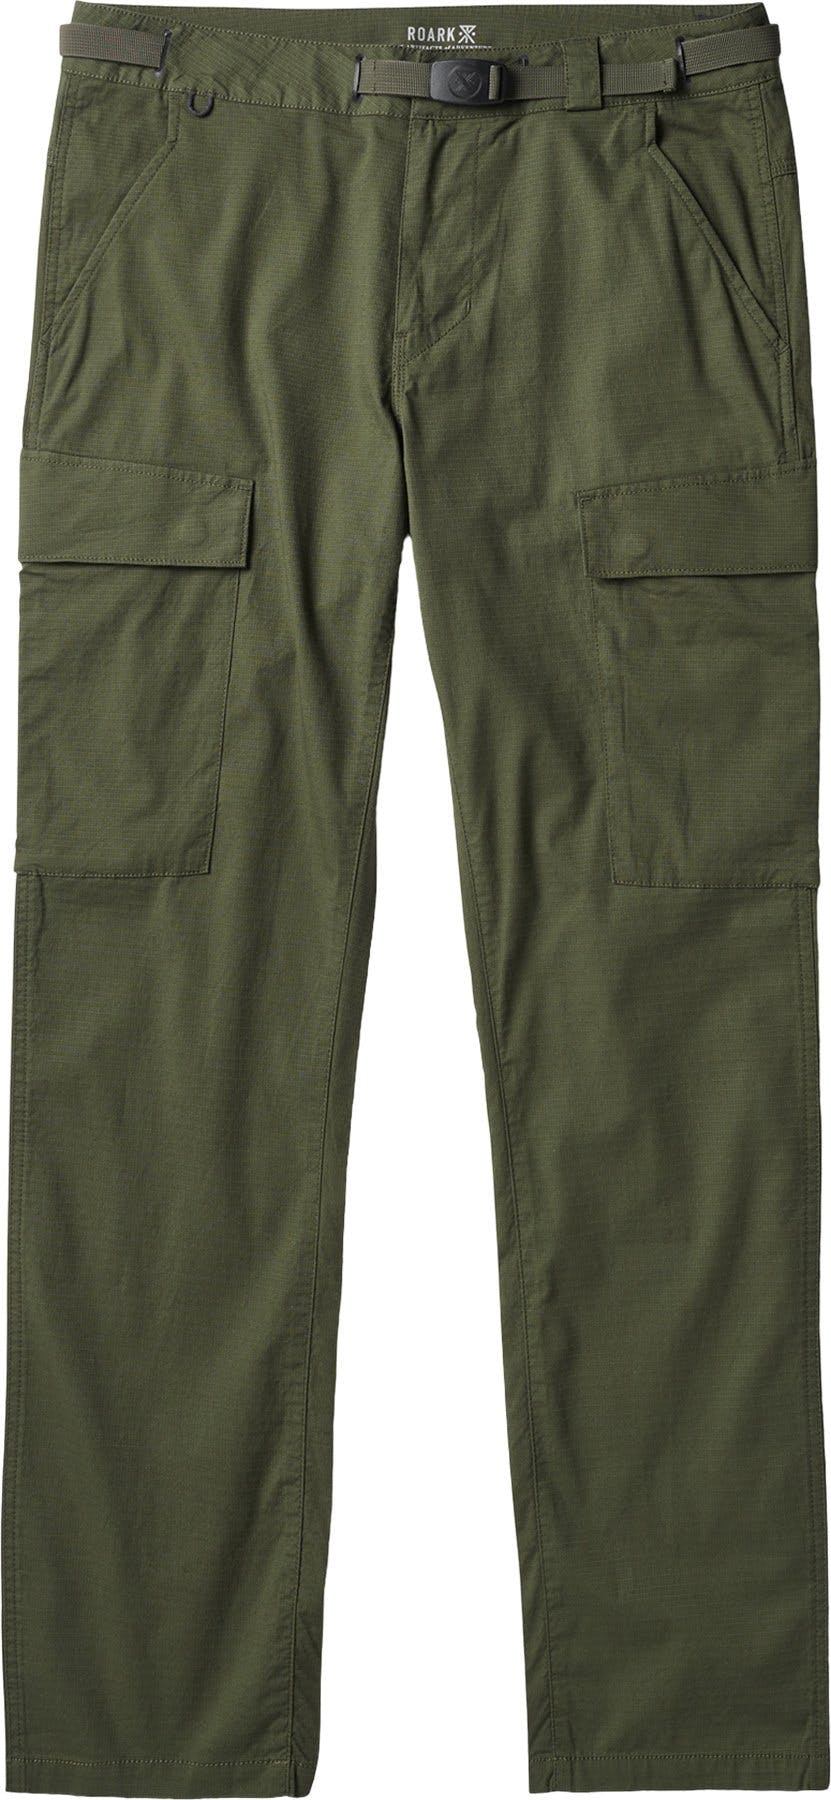 Product image for Campover Cargo Pants - Men's